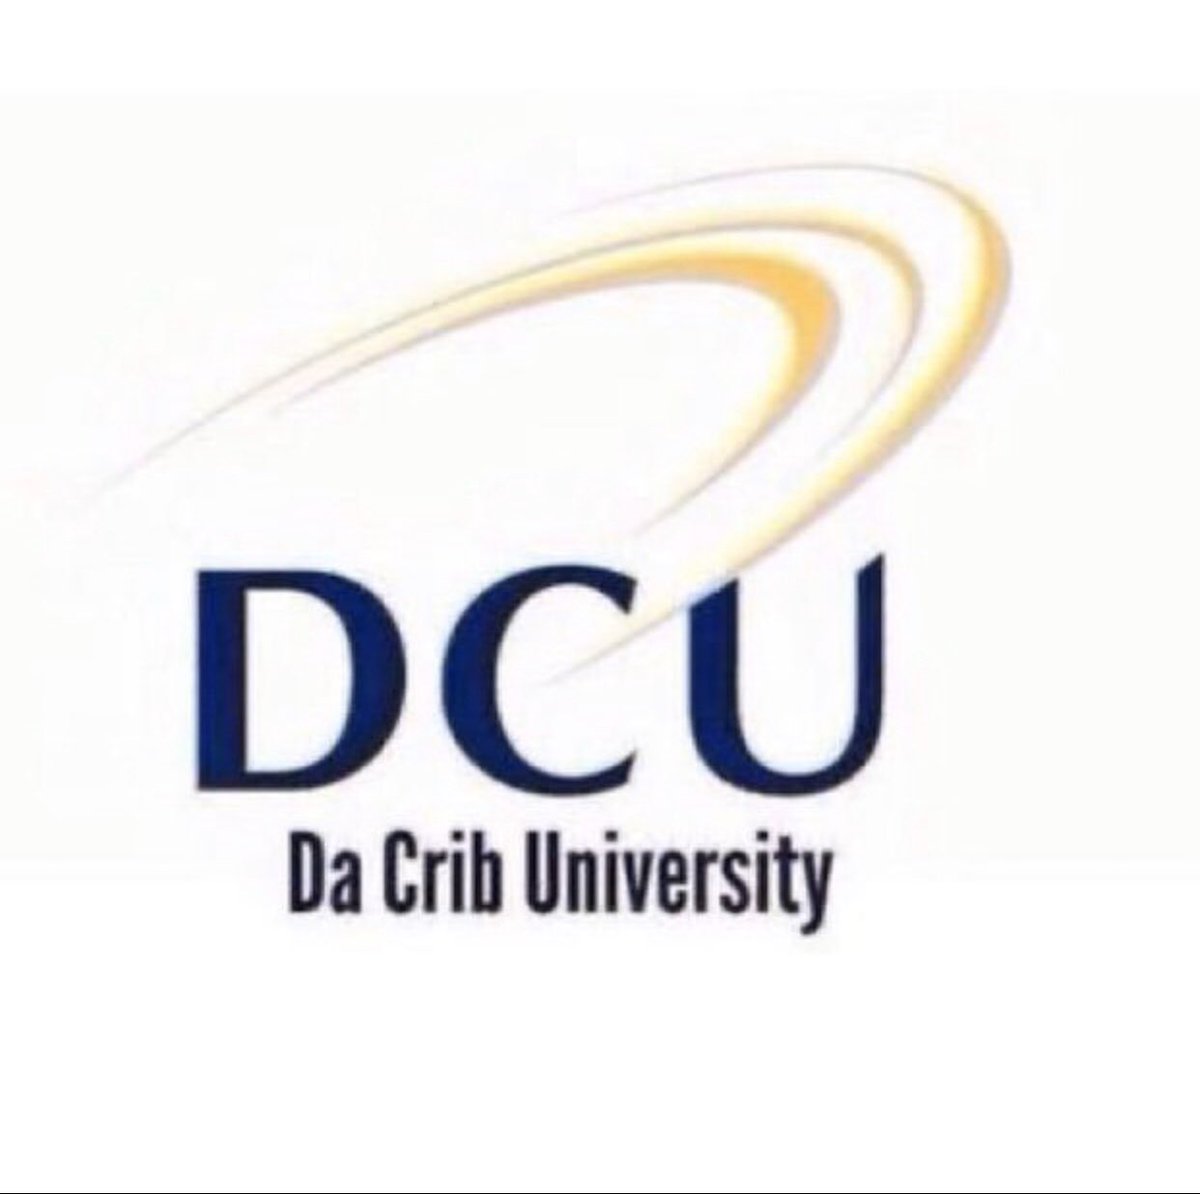 Poor grades.
No work ethic.
Skip practices and workouts. 
Not coachable .
Not a great teammate.
Will surely get you a full ride to DCU.
#StudentAthlete #Accountability #Grindmode #WhoGotNext